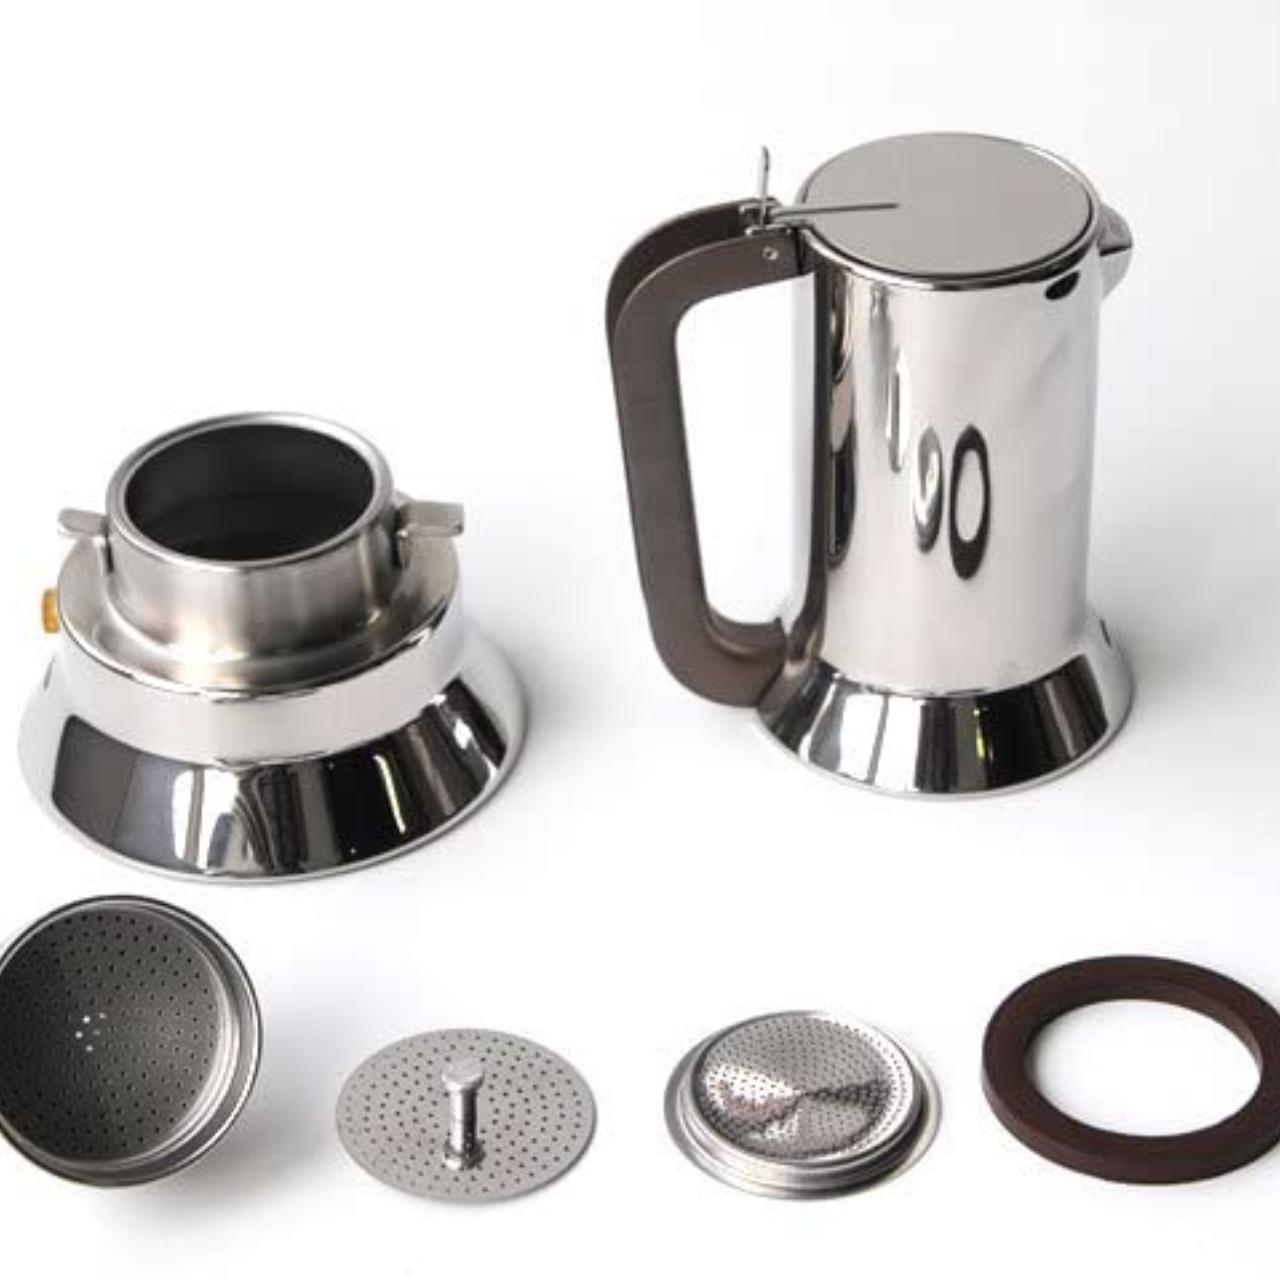 Product Image 1 - Alessi Espresso Maker 9090 by